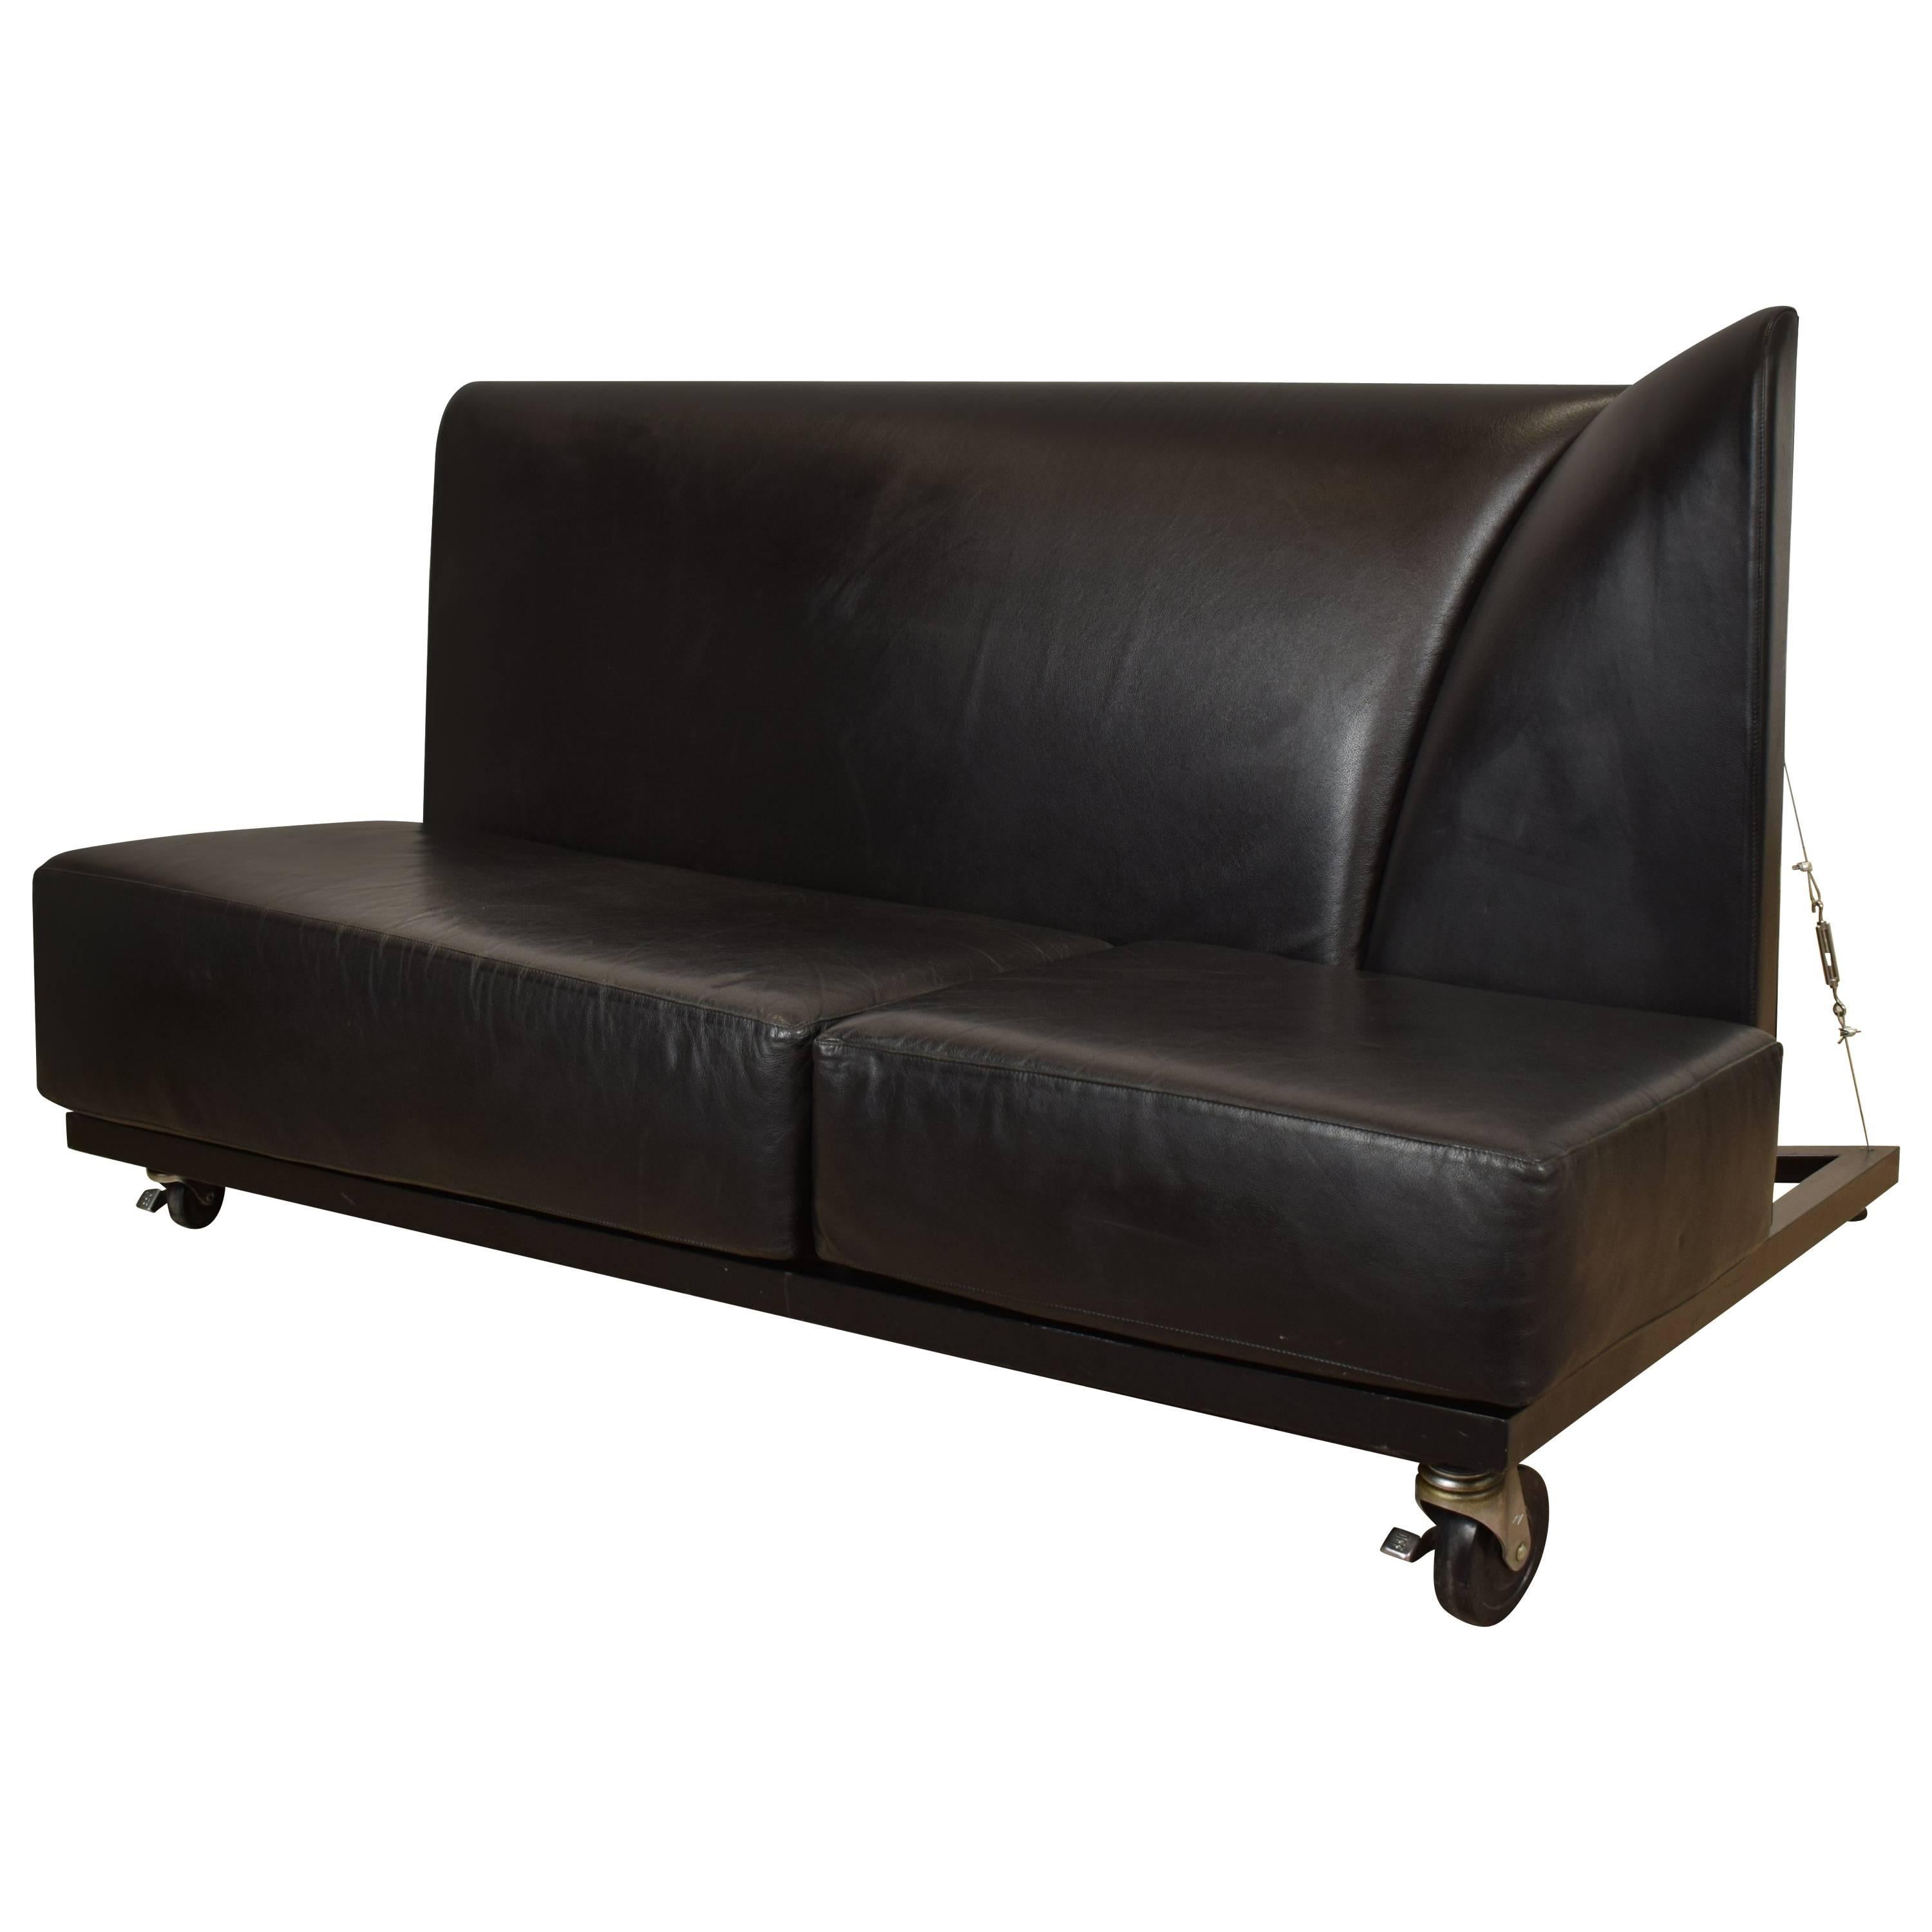 Mid-Century Memphis Black Leather Sofa by Pallucco and Rivier for Pallucco, 1988